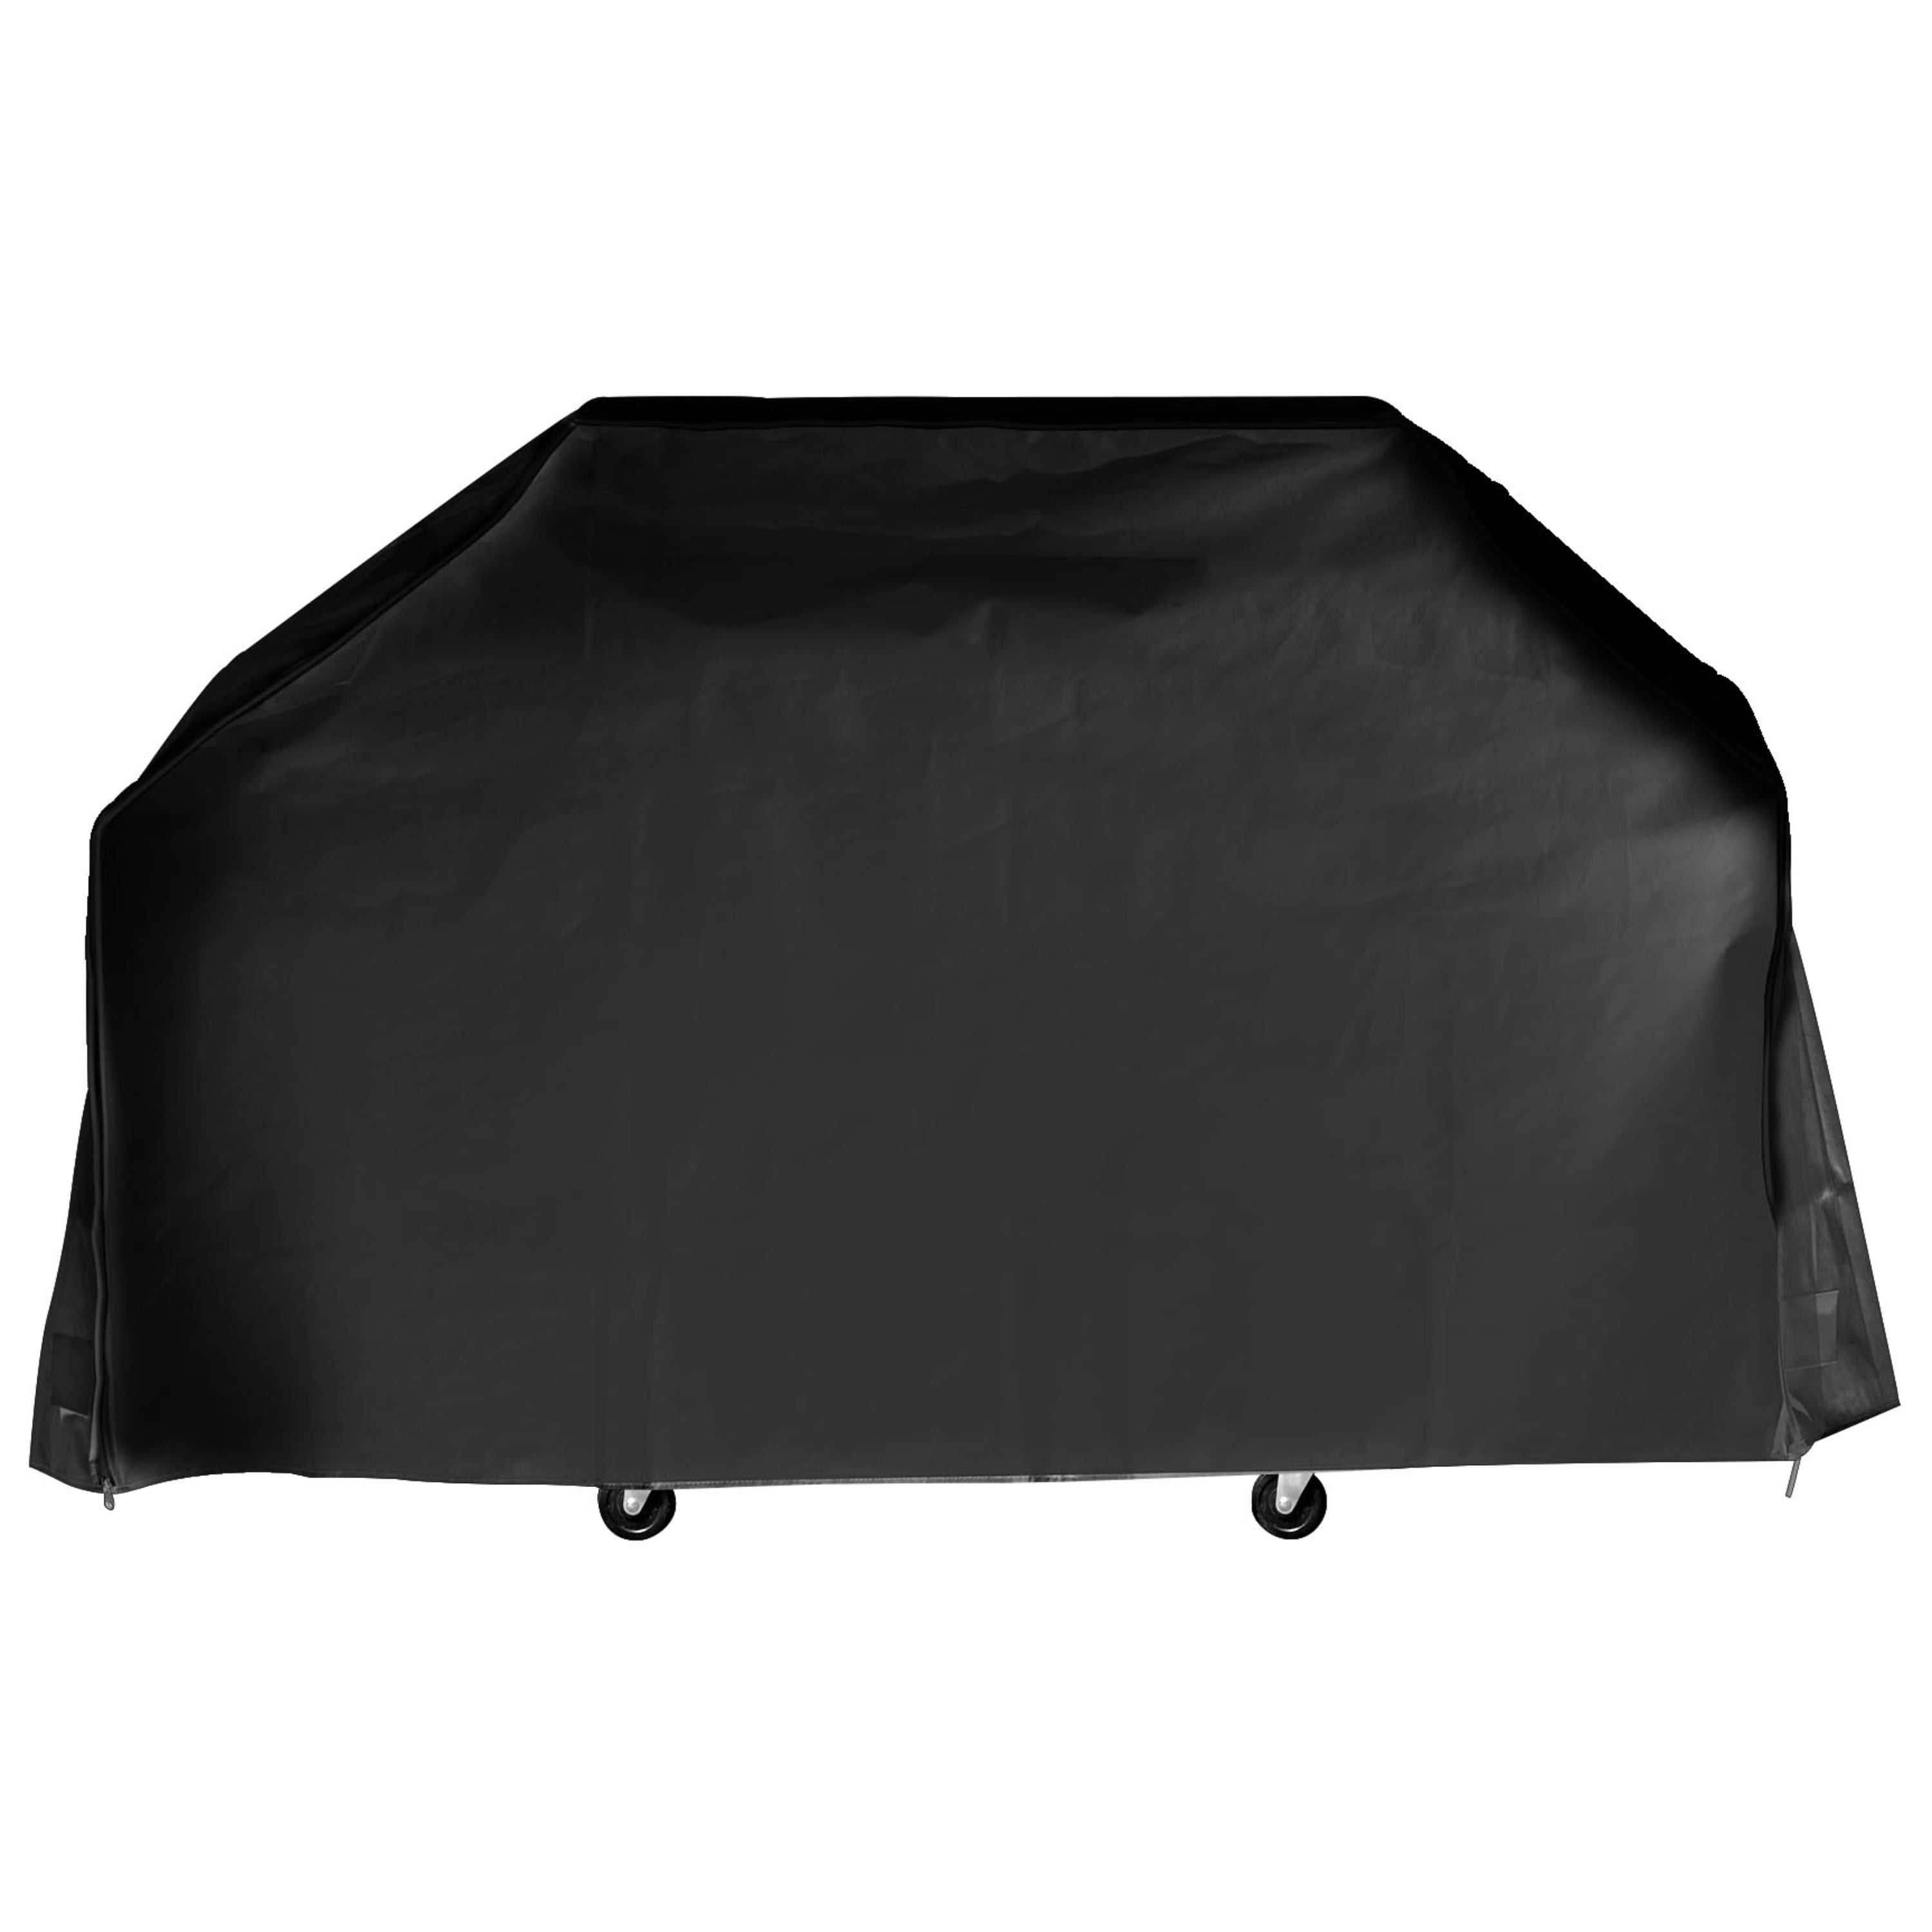 Heavy Duty BBQ Gas Grill Cover Barbecue Waterproof Outdoor UV Protection 57" 